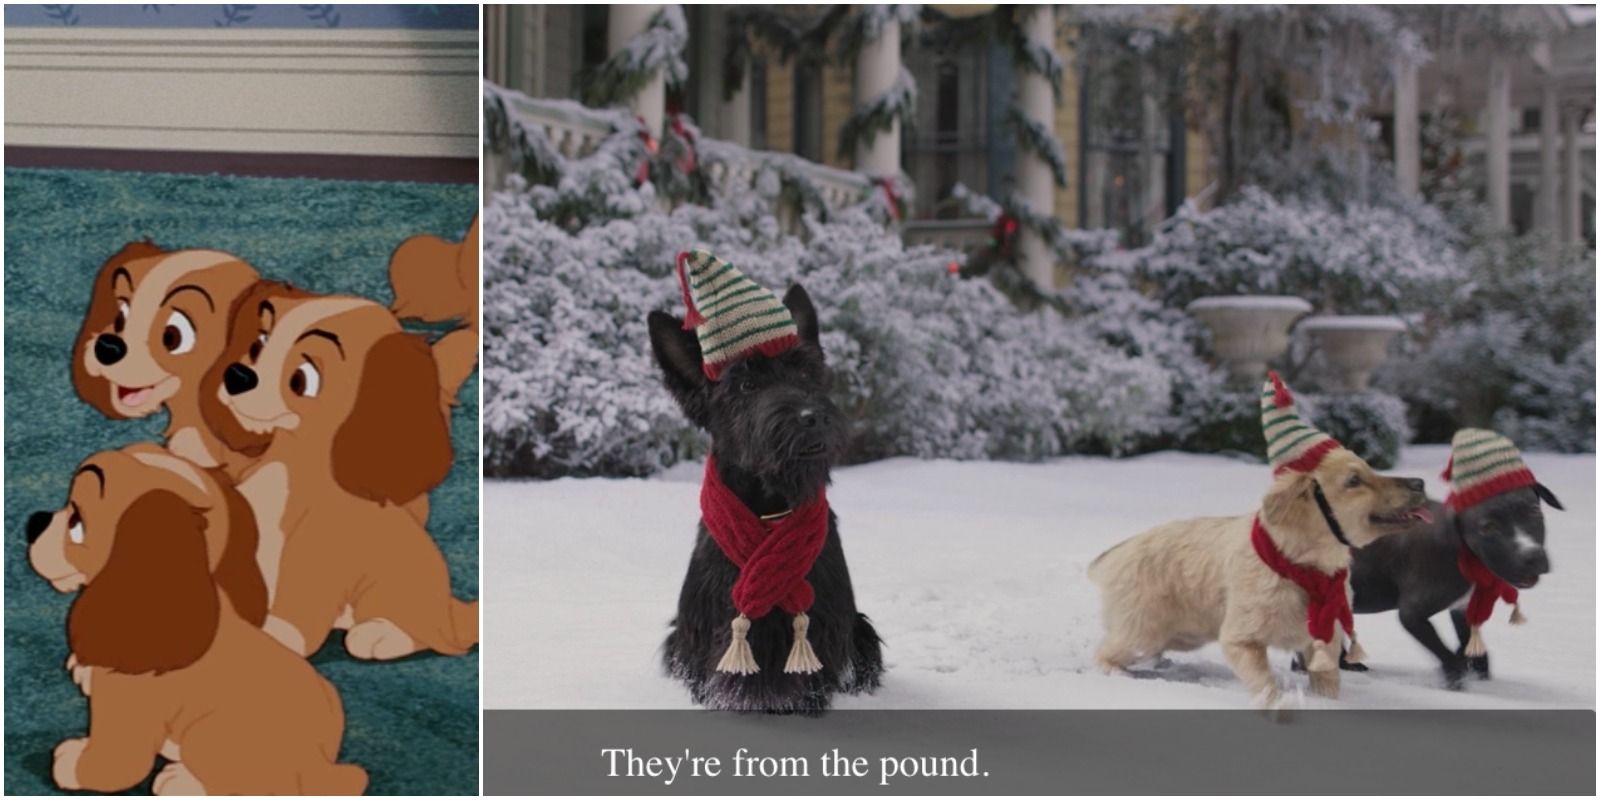 Scenes from both movies; puppies inside, puppies outside in snow